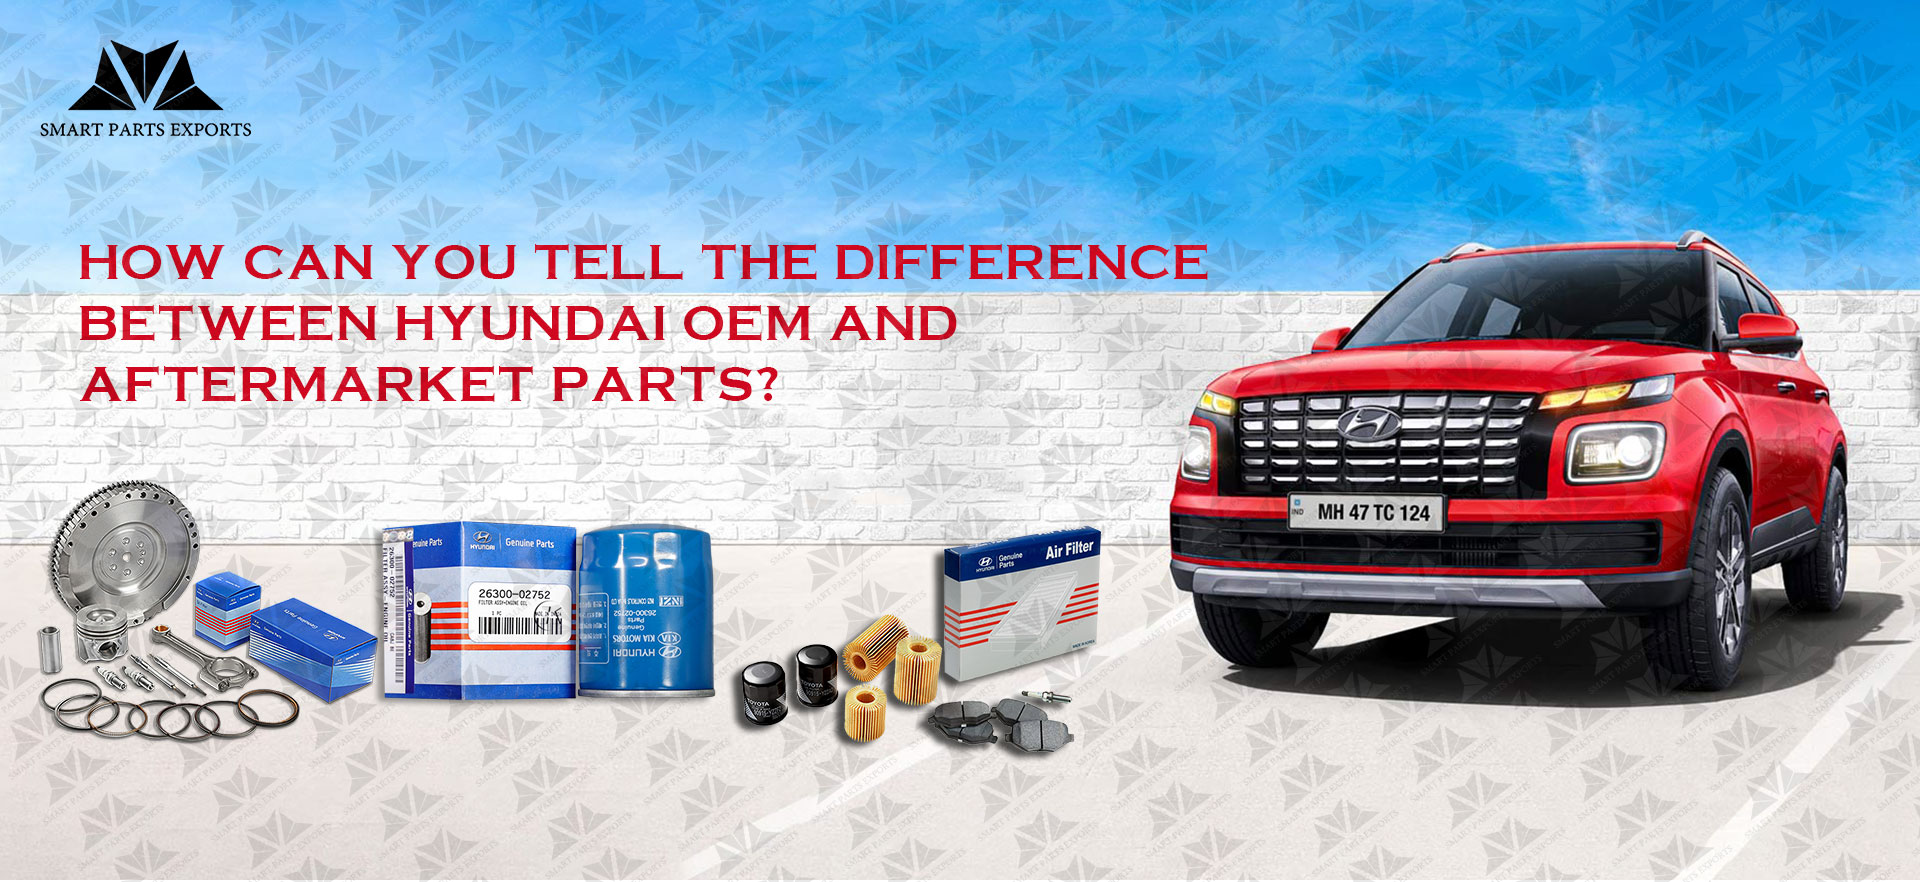 How can you tell the difference between Hyundai OEM and aftermarket parts?